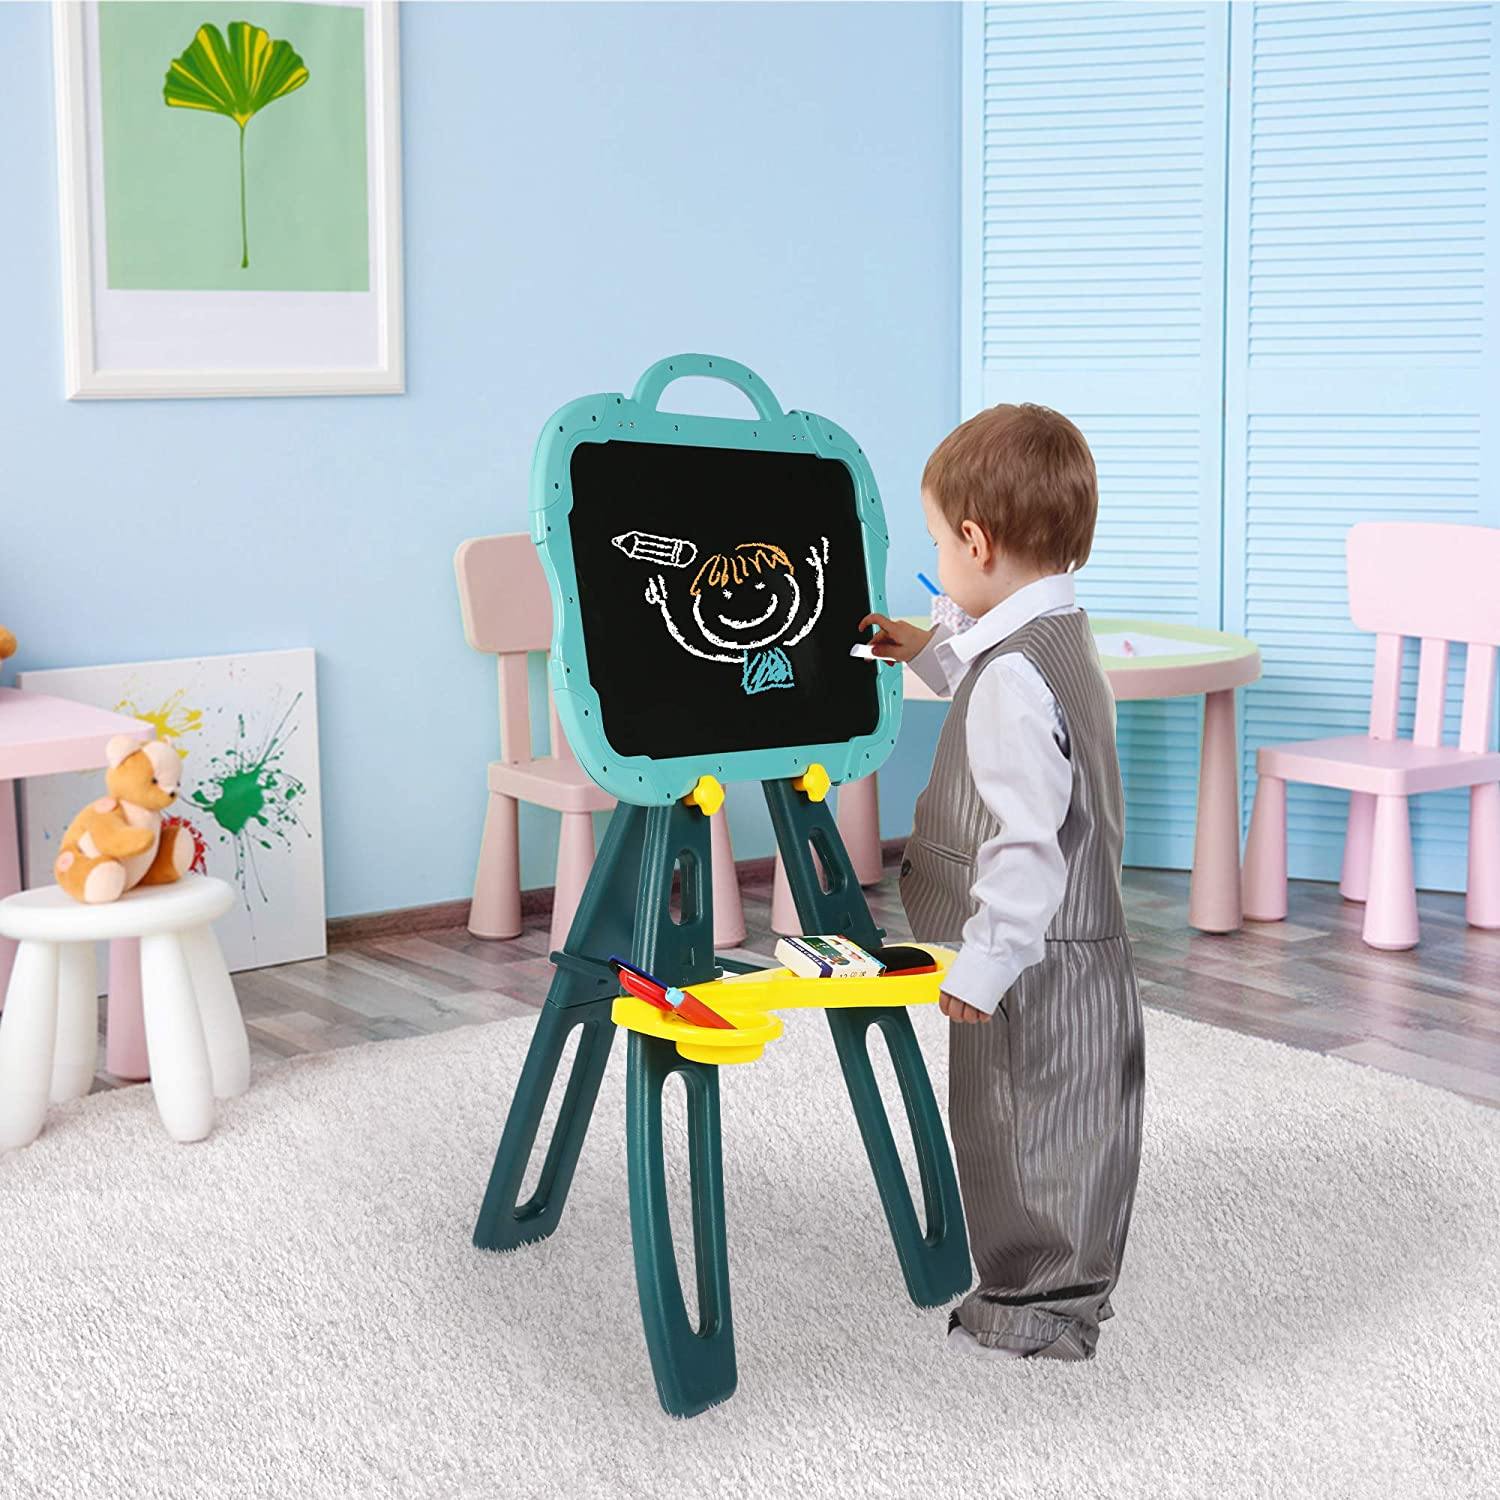 Standing Easel Board For Kids, 3 in 1 Dry Erase White Board, Magnetic Board And Chalkboard Art Activity Drawing With Extra Accessories For Kid, Blue - Bosonshop